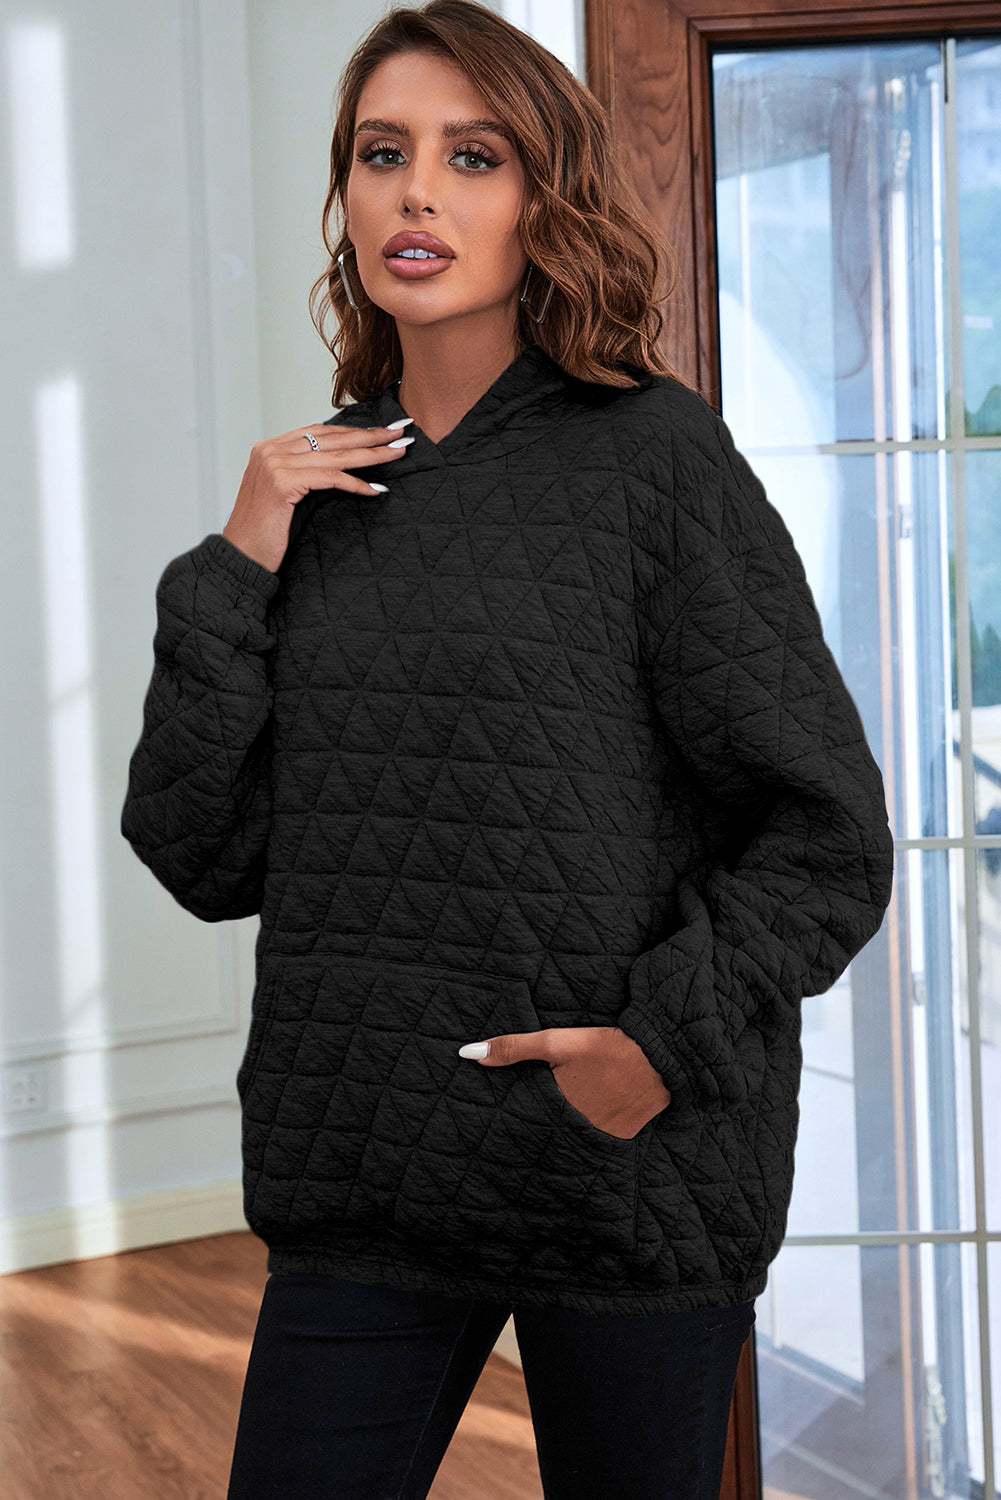 Black Color Block Quilted 3/4 Sleeve Top and Shorts Set